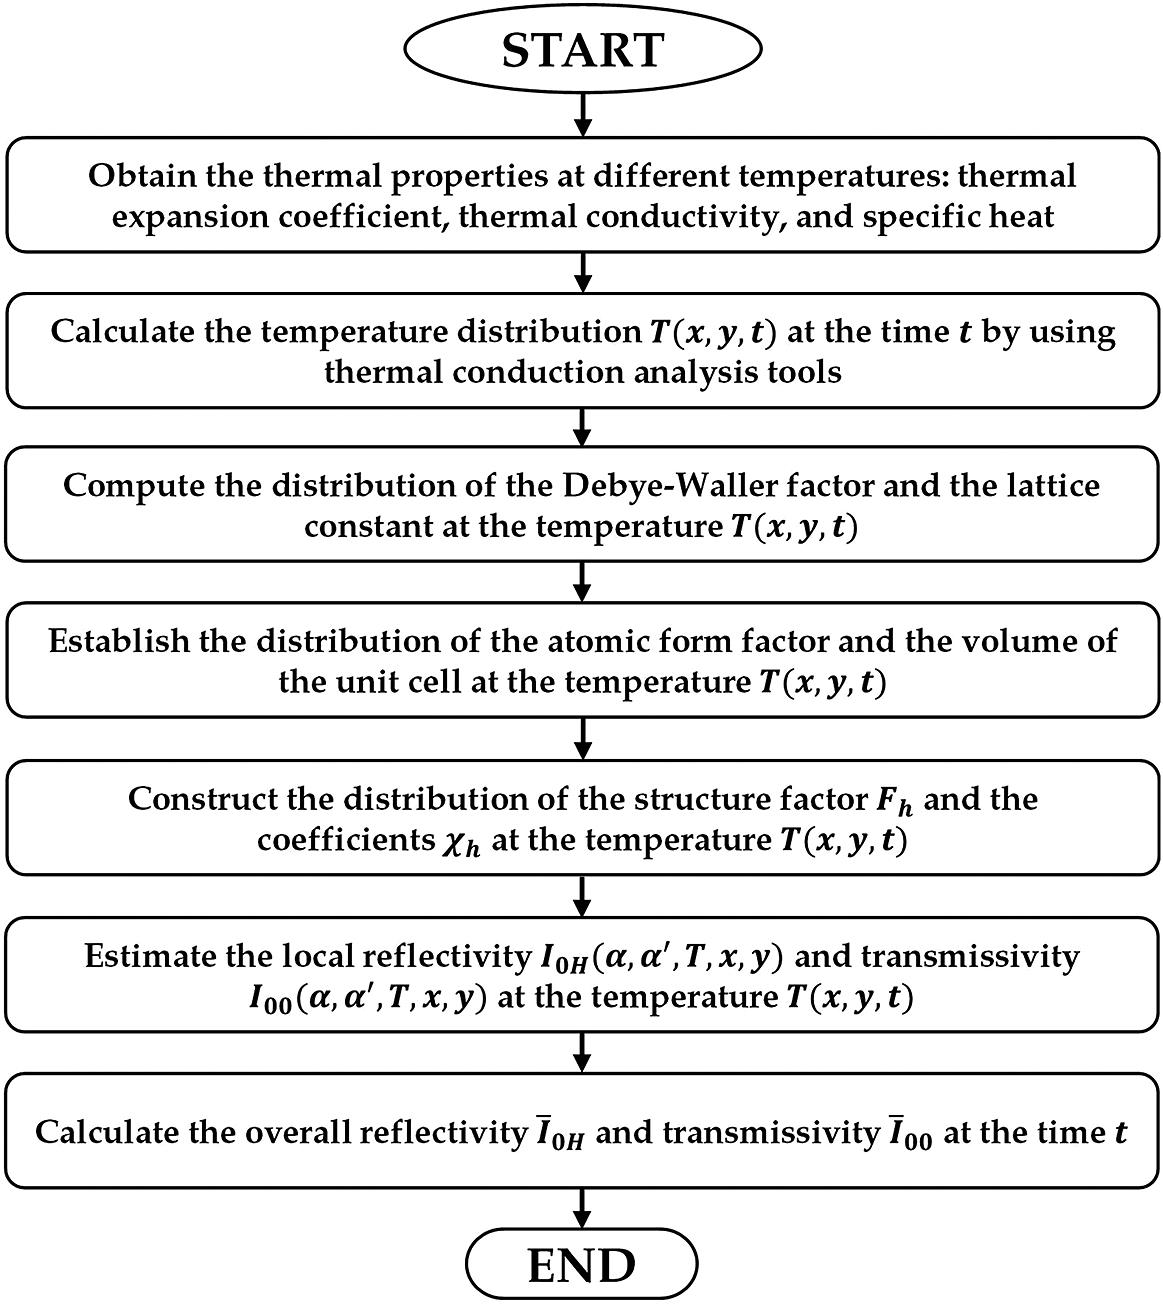 The calculation framework of the local reflectivity and transmissivity.